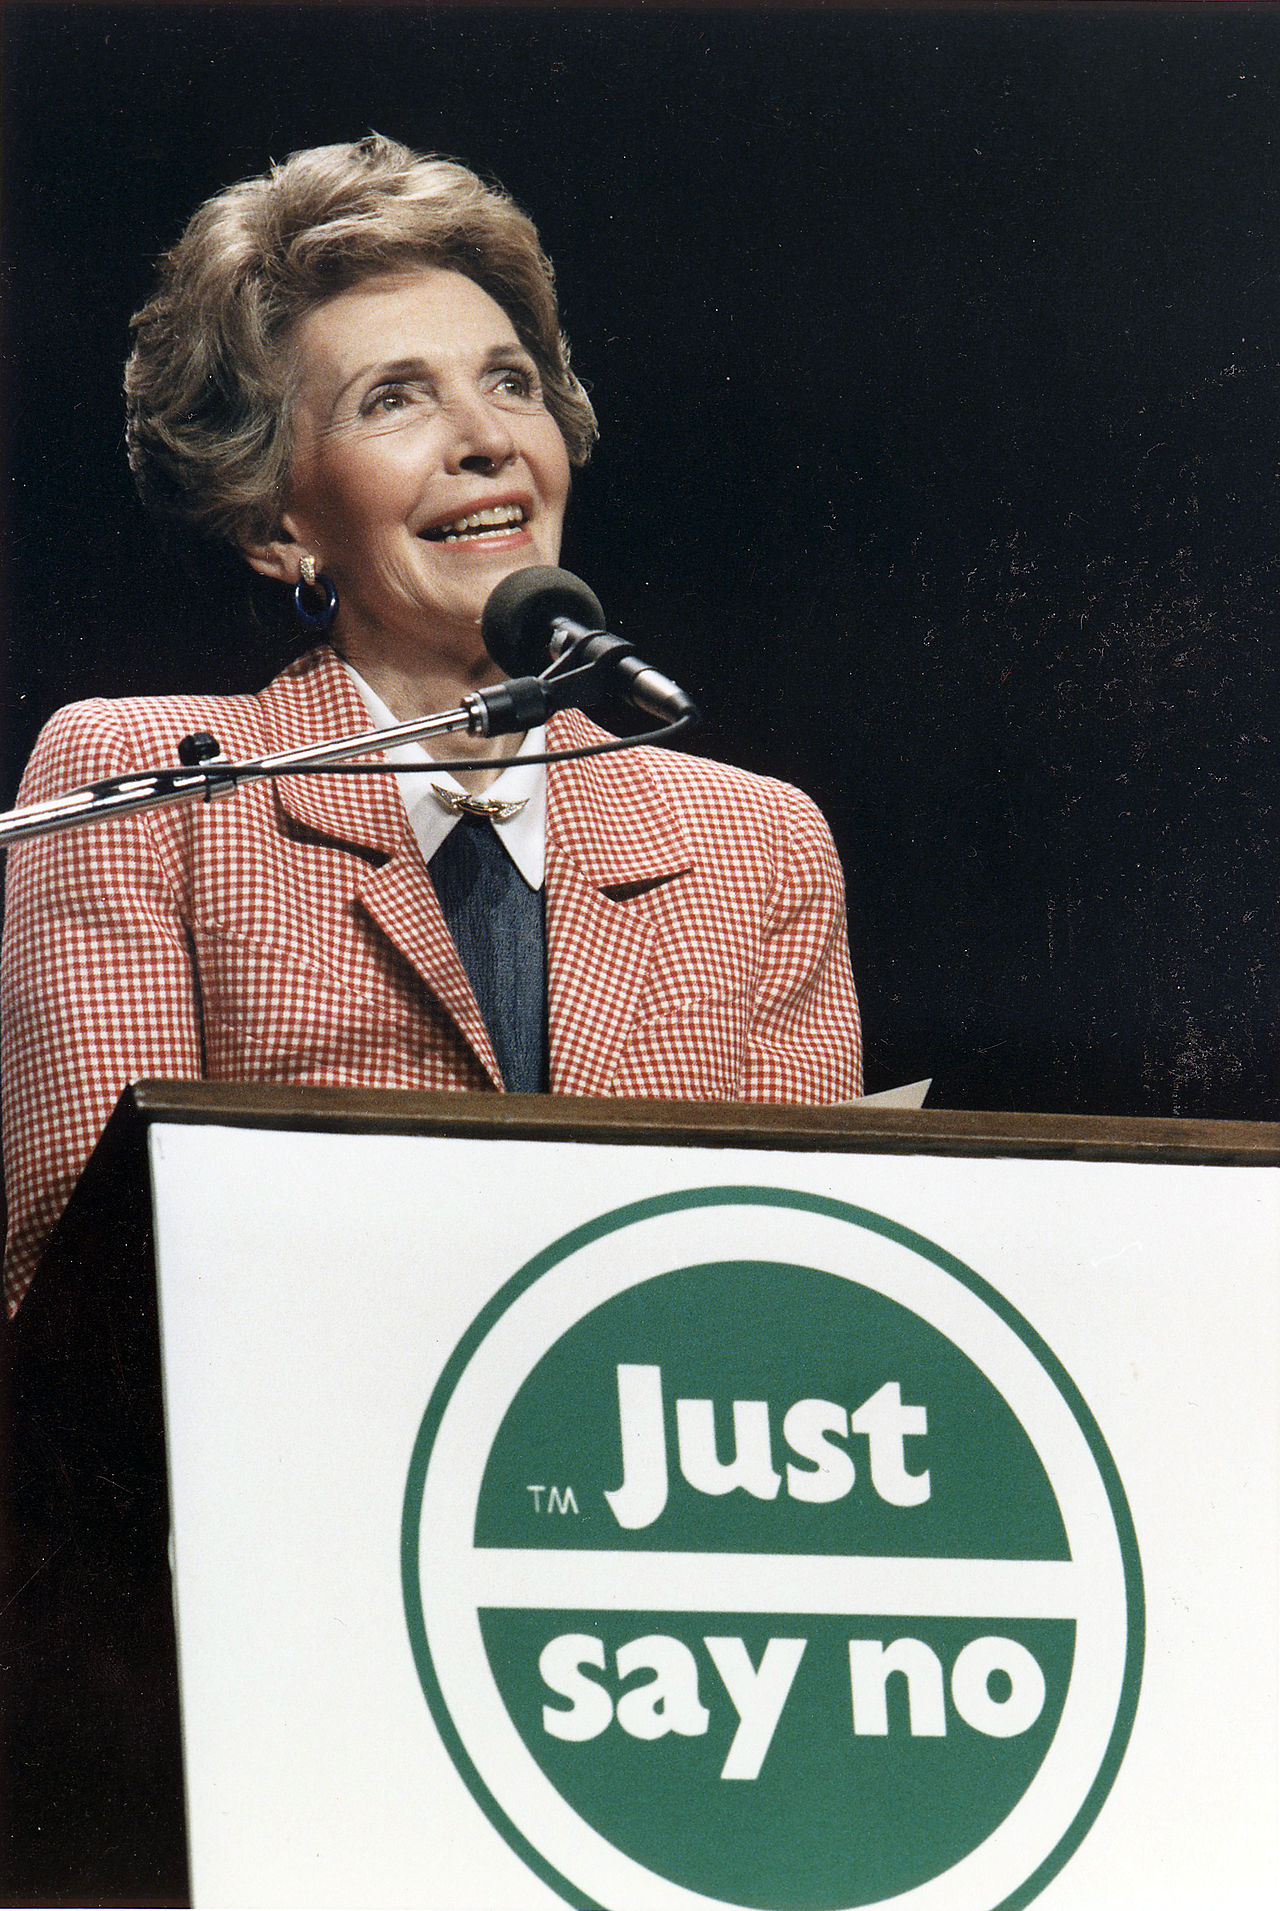 1280px-Photograph_of_Mrs._Reagan_speaking_at_a_"Just_Say_No"_Rally_in_Los_Angeles_-_NARA_-_198584.jpg